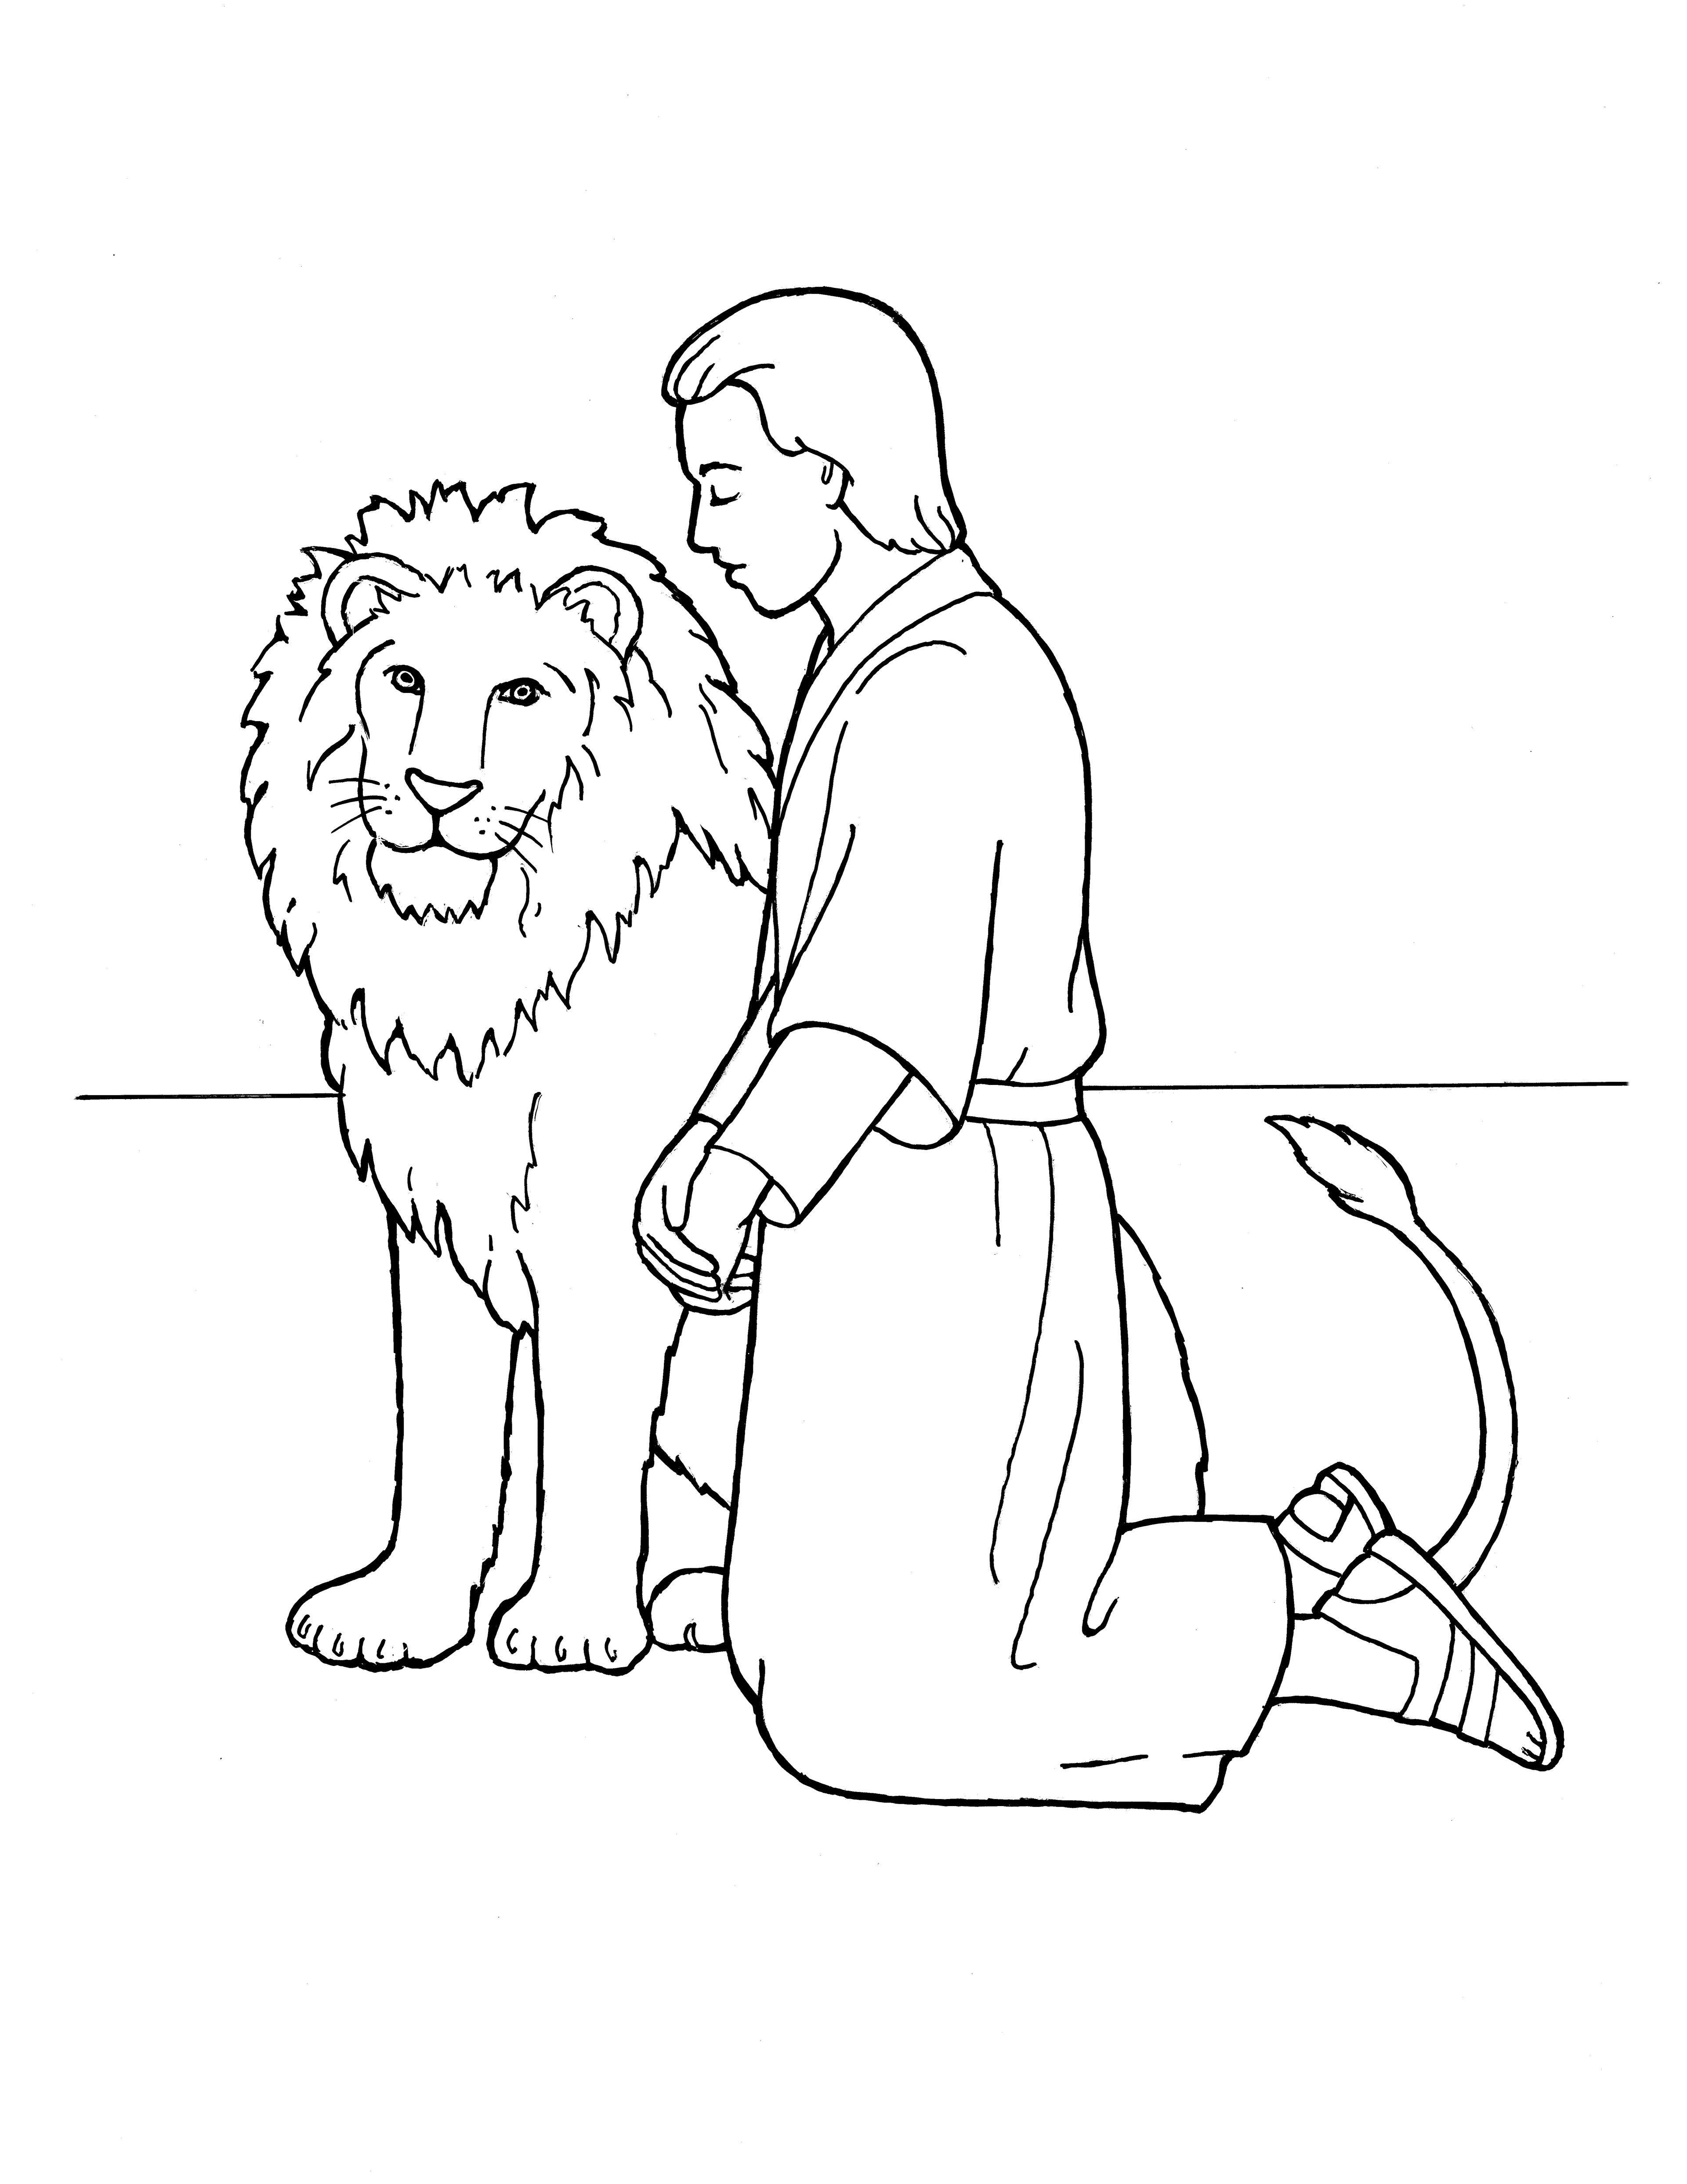 An illustration of Daniel kneeling in prayer beside a lion, from the nursery manual Behold Your Little Ones (2008), page 103.